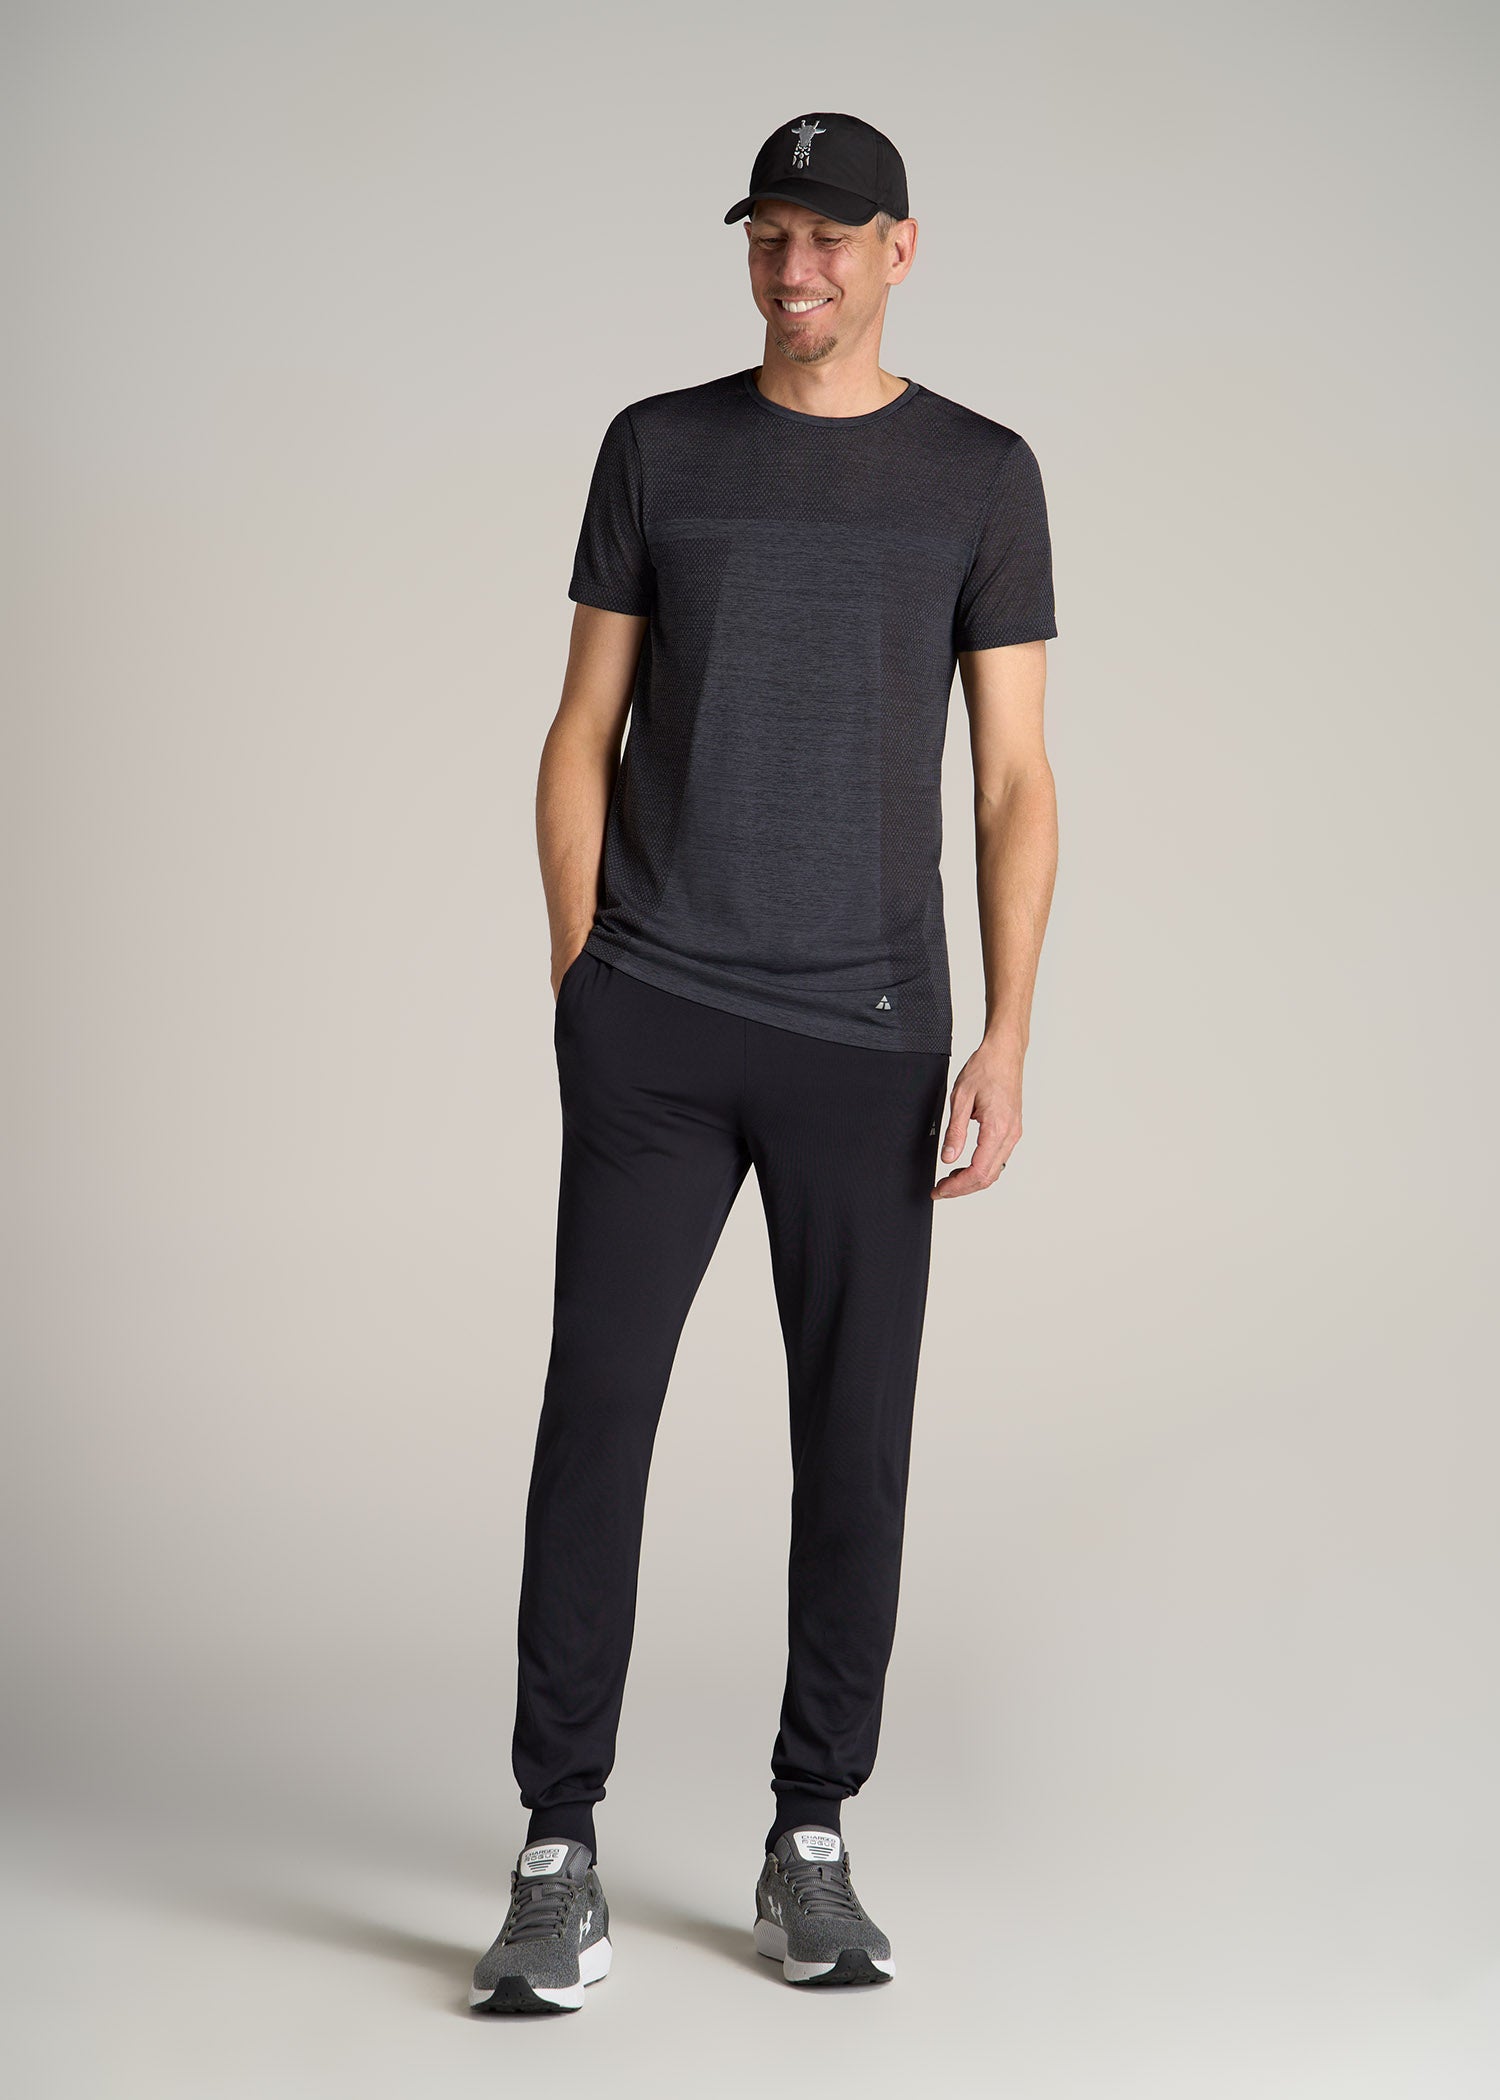 American-Tall-Men-AT-Performance-Engineered-Athletic-Tee-Charcoal-Mix-full